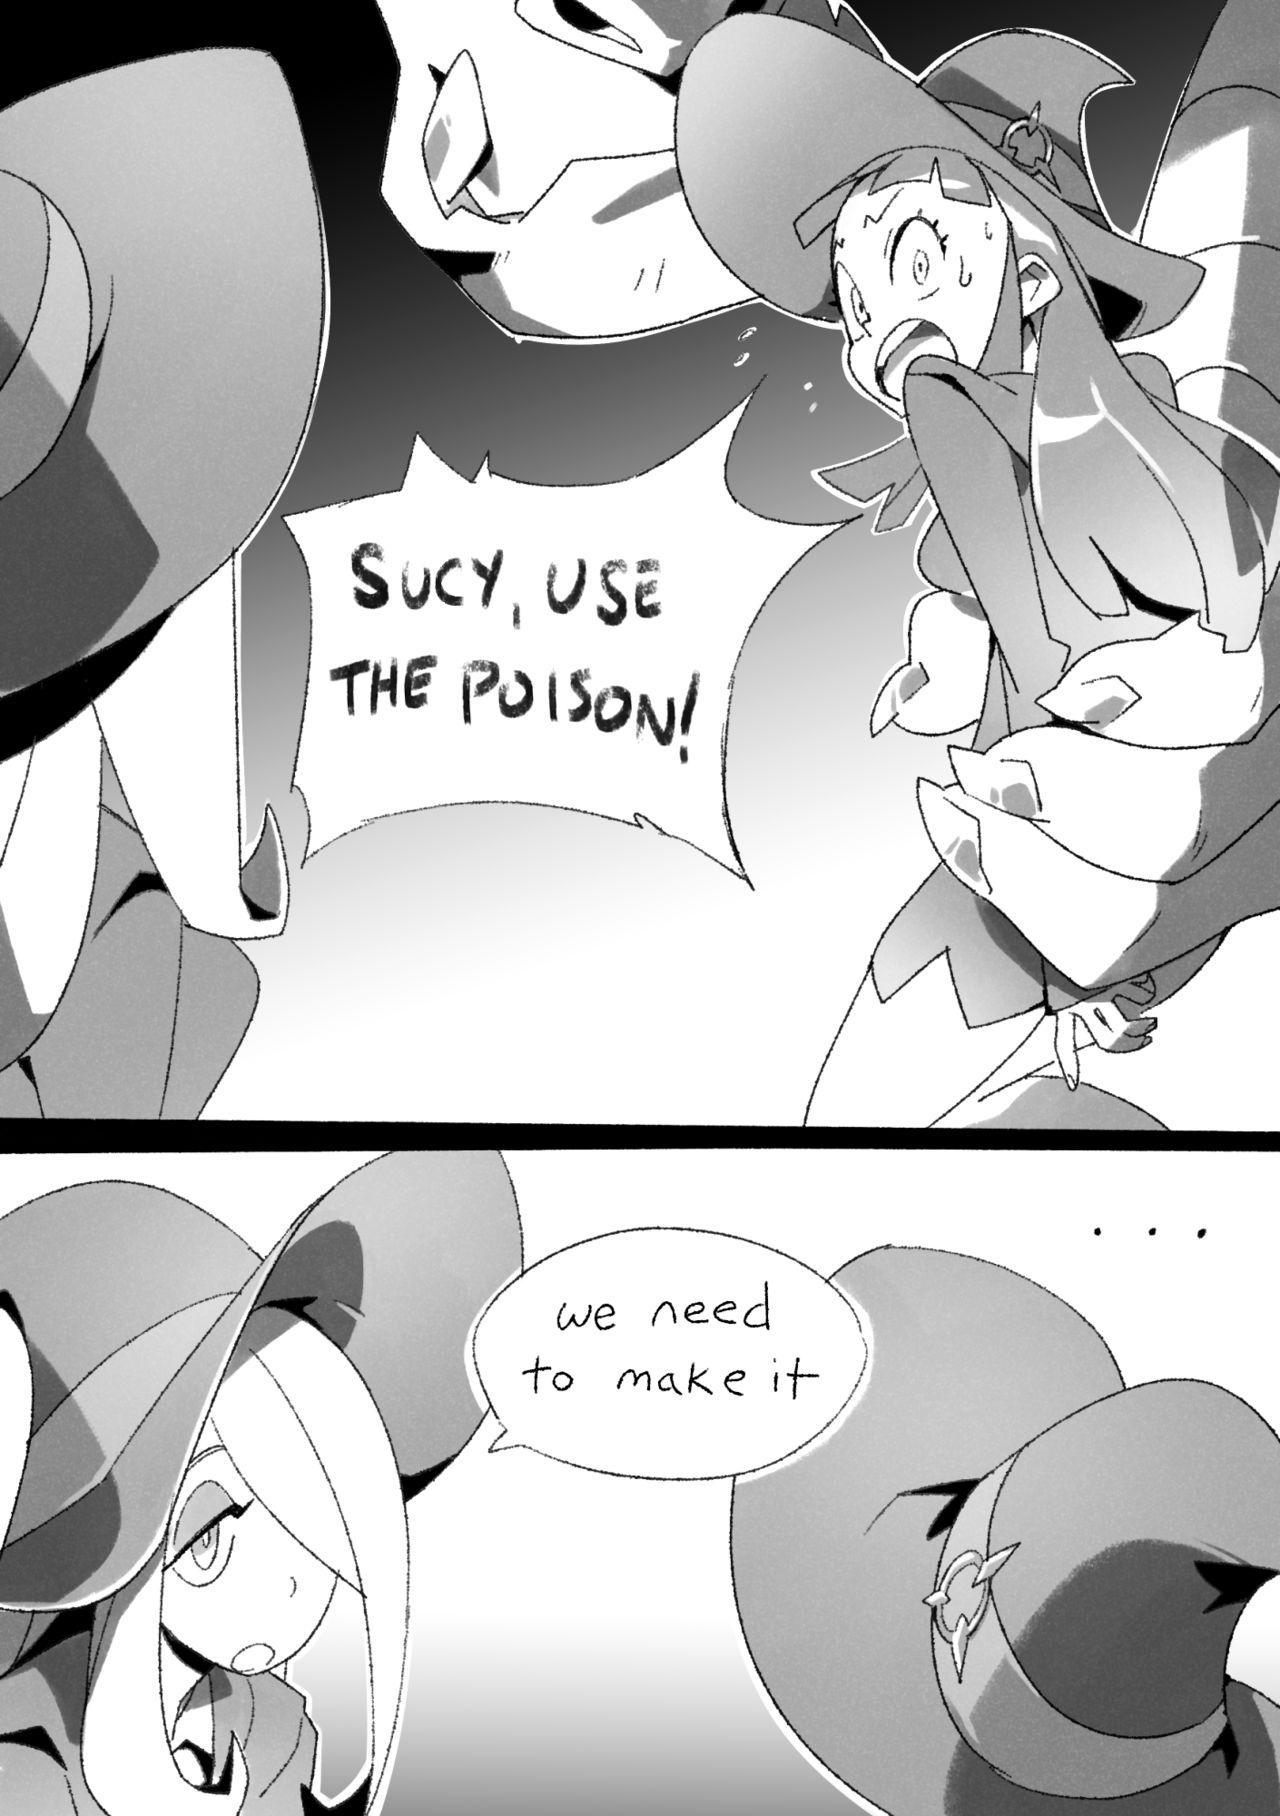 Sucking Dicks Team Building - Little witch academia Wild - Page 4